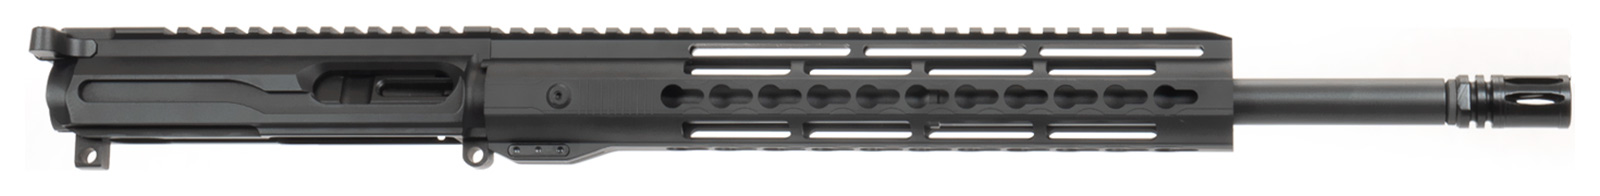 ar-15-complete-upper-assembly-16-9mm-1-10-12-hera-arms-unmarked-keymod-ar-15-handguard-rail-with-bcg-chh